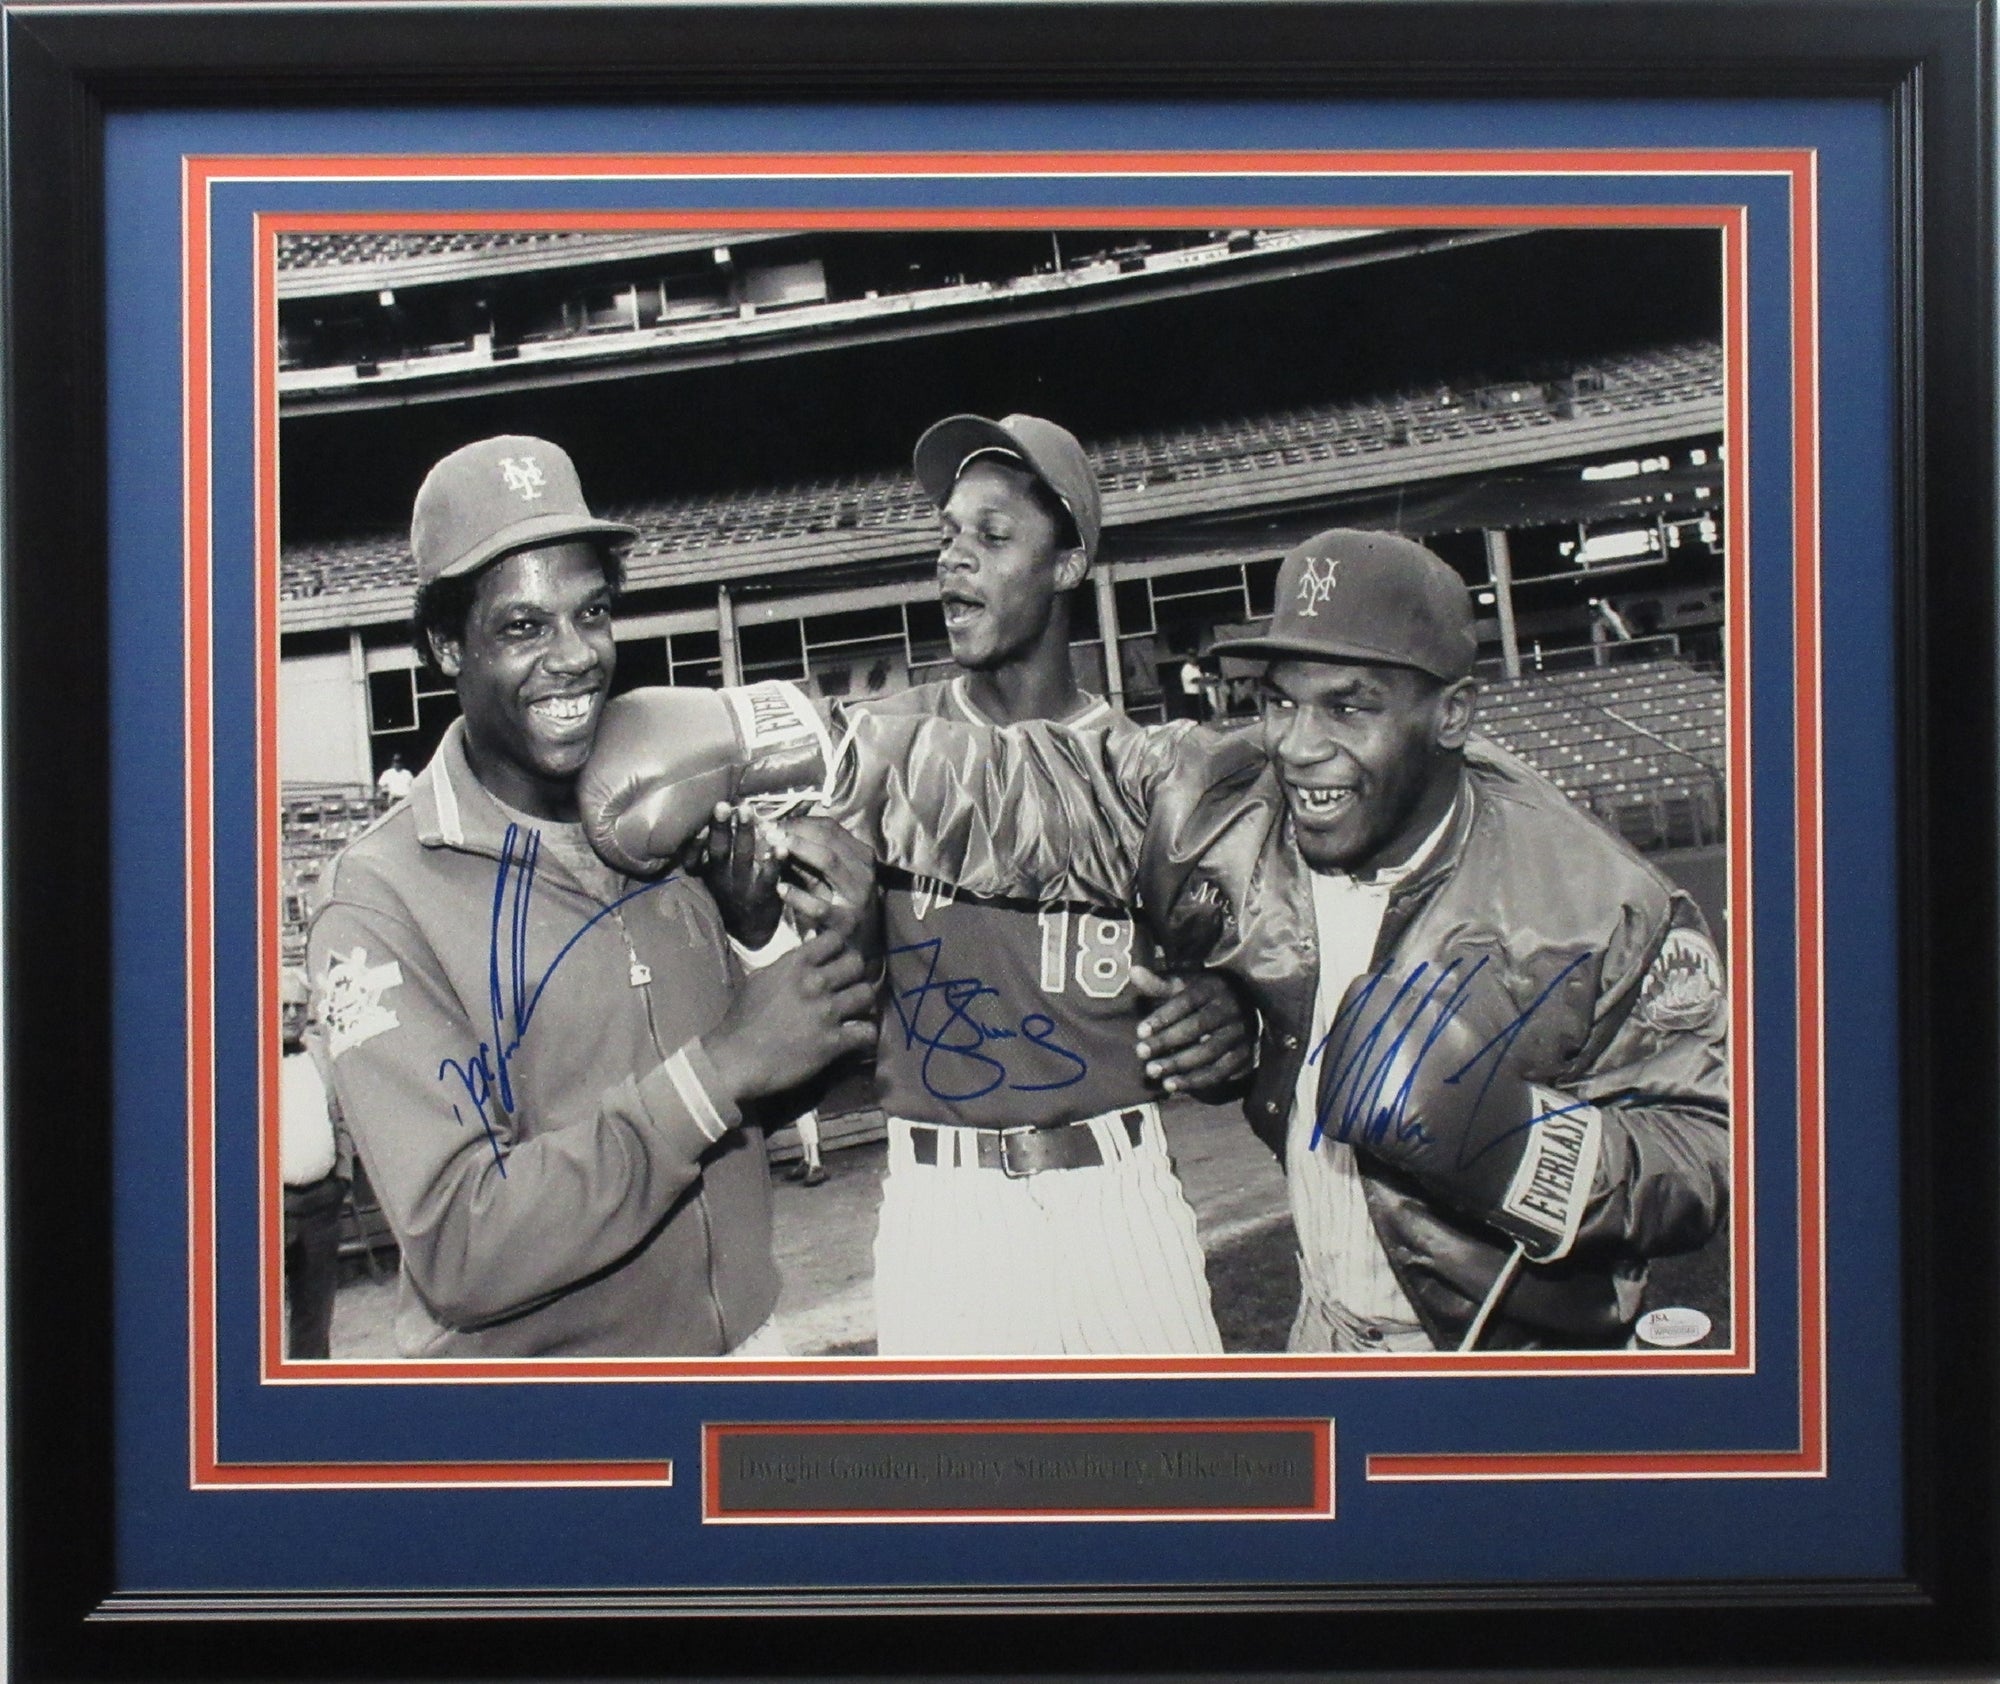 Gooden, Strawberry & Tyson Autographed 16x20  N.Y. Mets Photo Framed